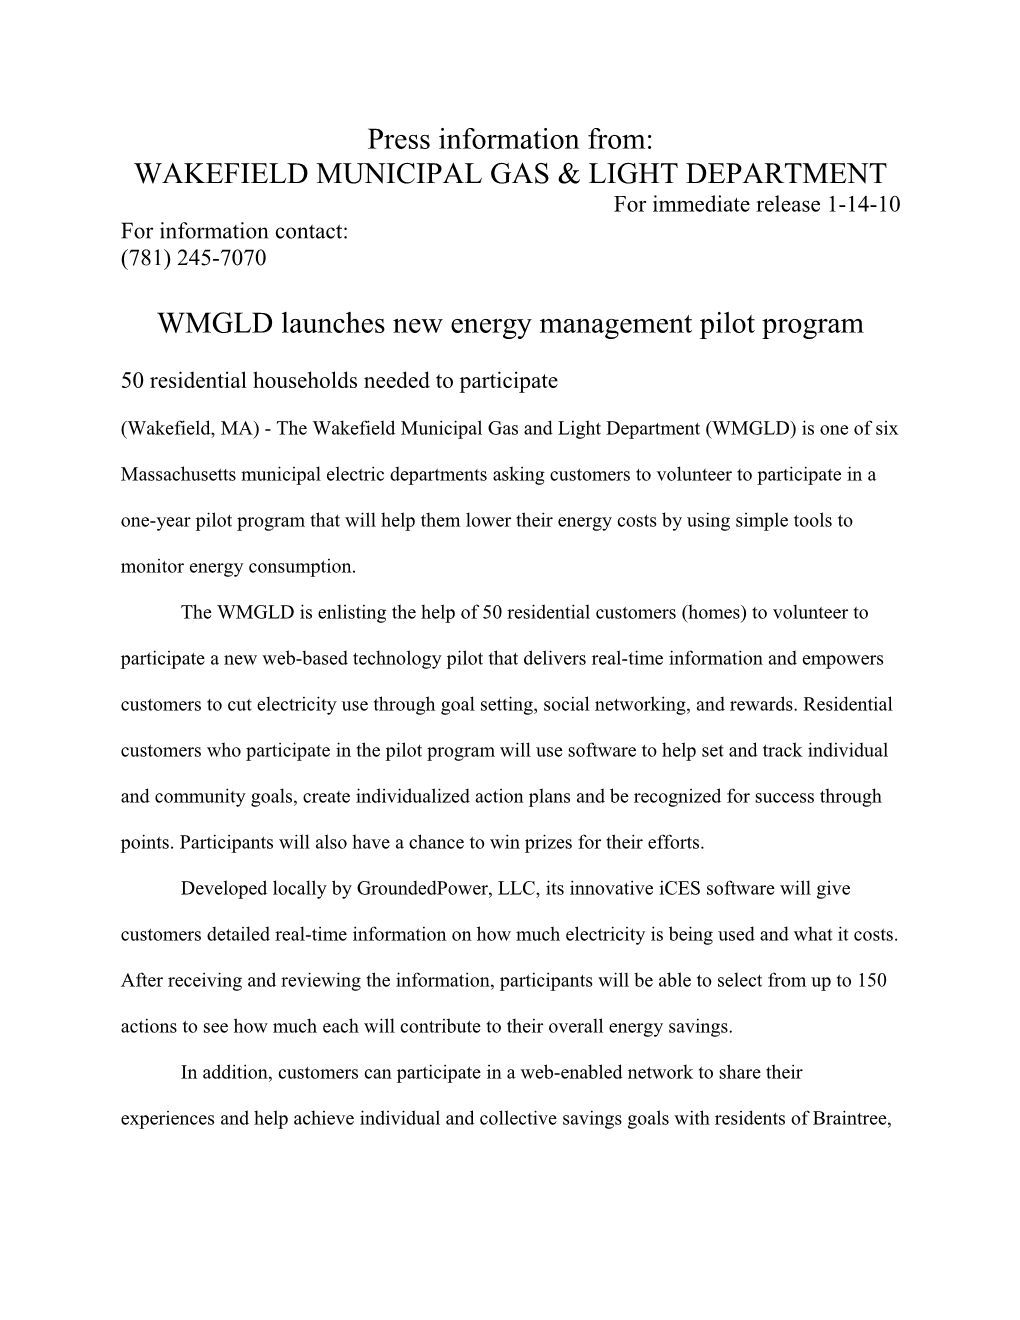 Wakefield Municipal Gas and Light Department Launches New Energy Management Program